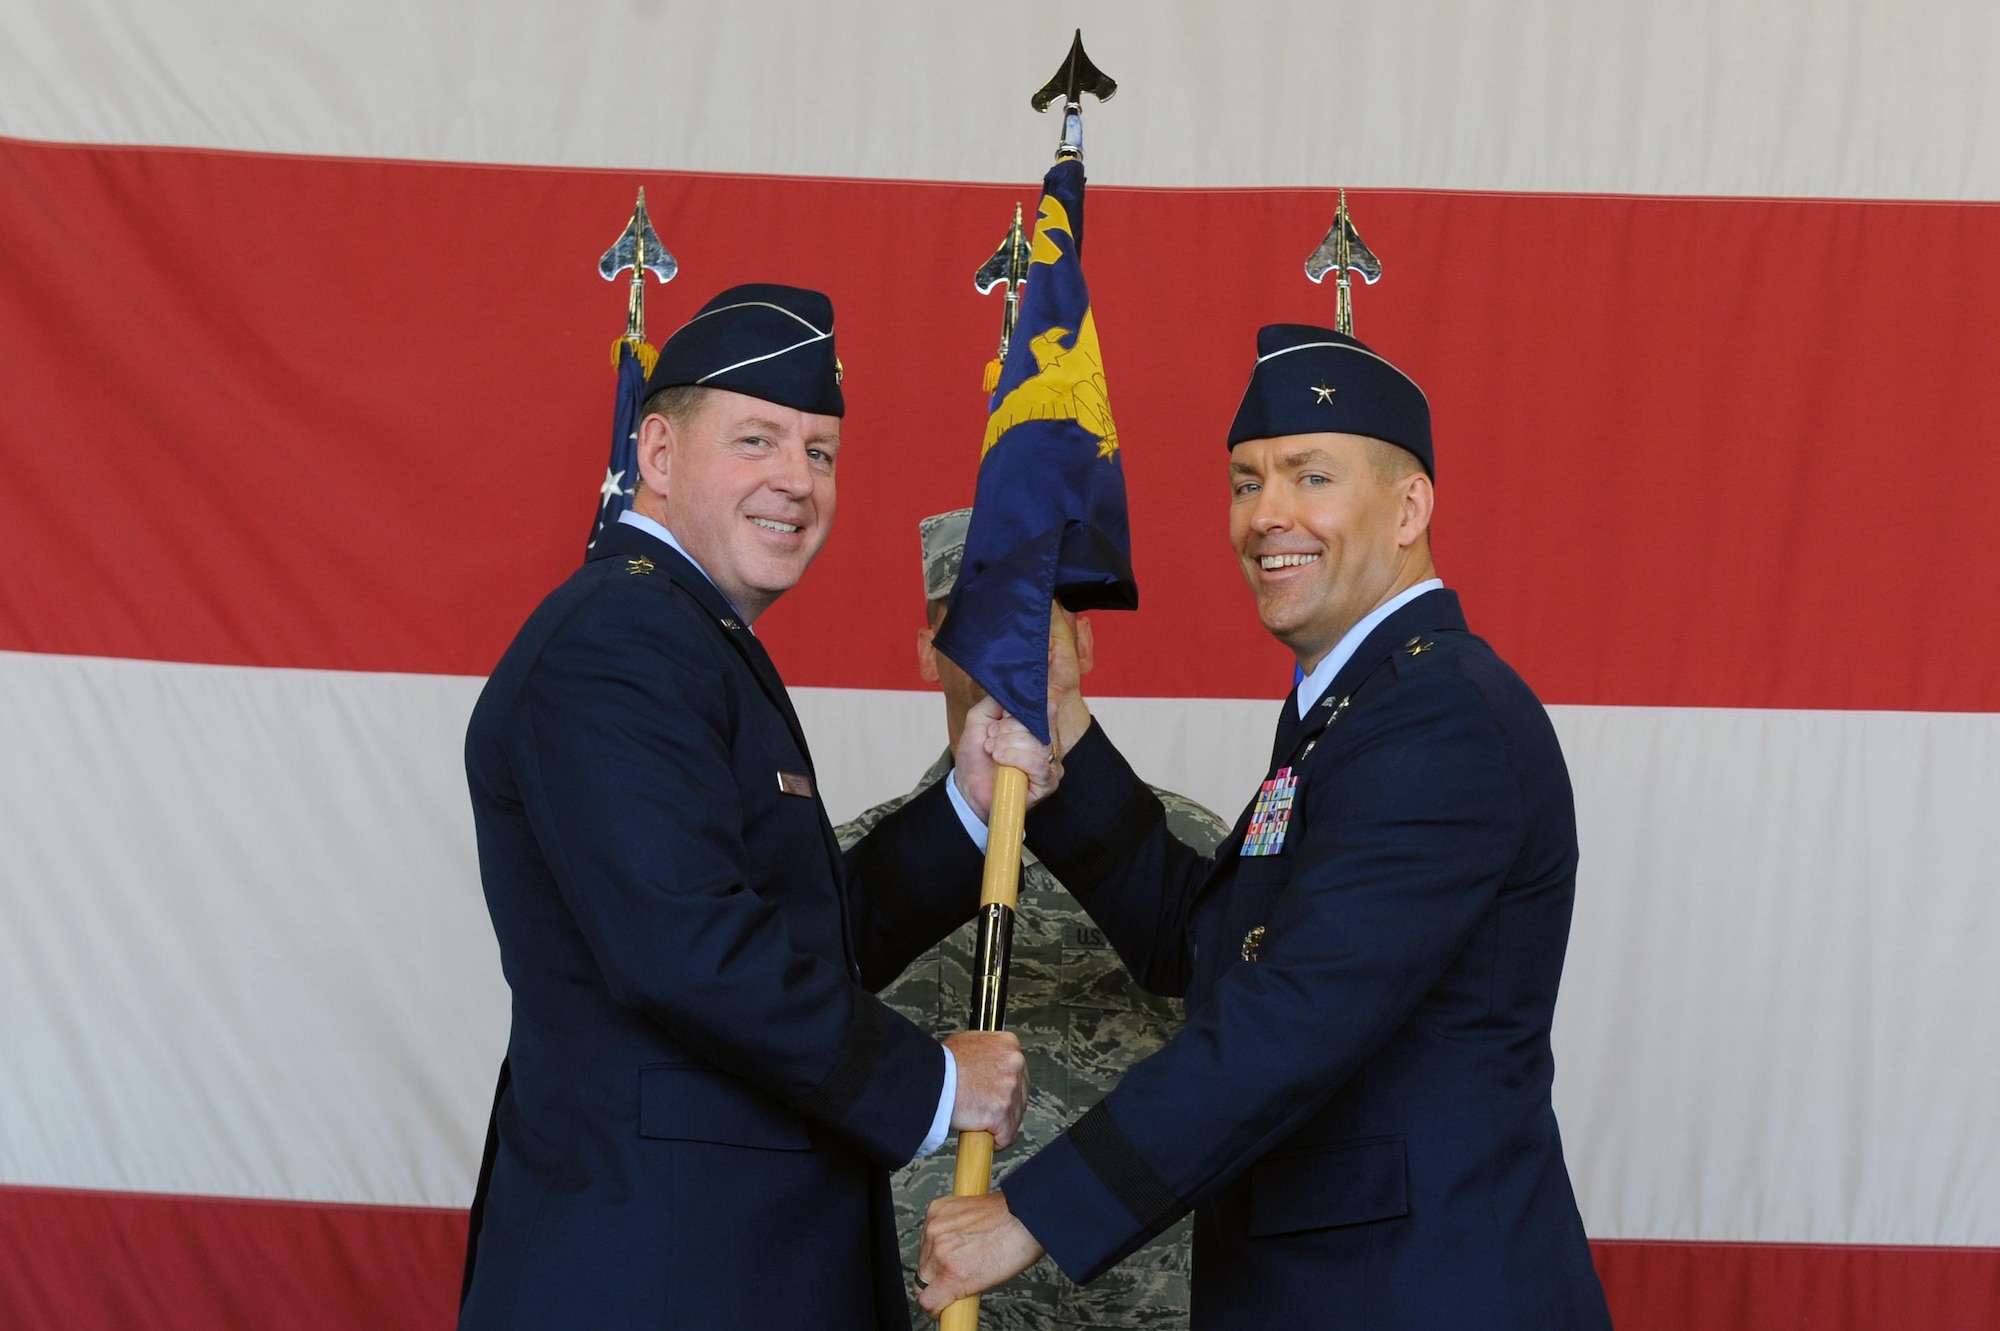 Maj. Gen. James Hecker, 19th Air Force commander, hands the guidon to the incoming commander Brig. Gen. Brook Leonard at Luke Air Force Base, Arizona, July 13, 2016. Leonard will be the commander of the 56th Fighter Wing. (U.S. Air Force photo by Airman 1st Class Pedro Mota)